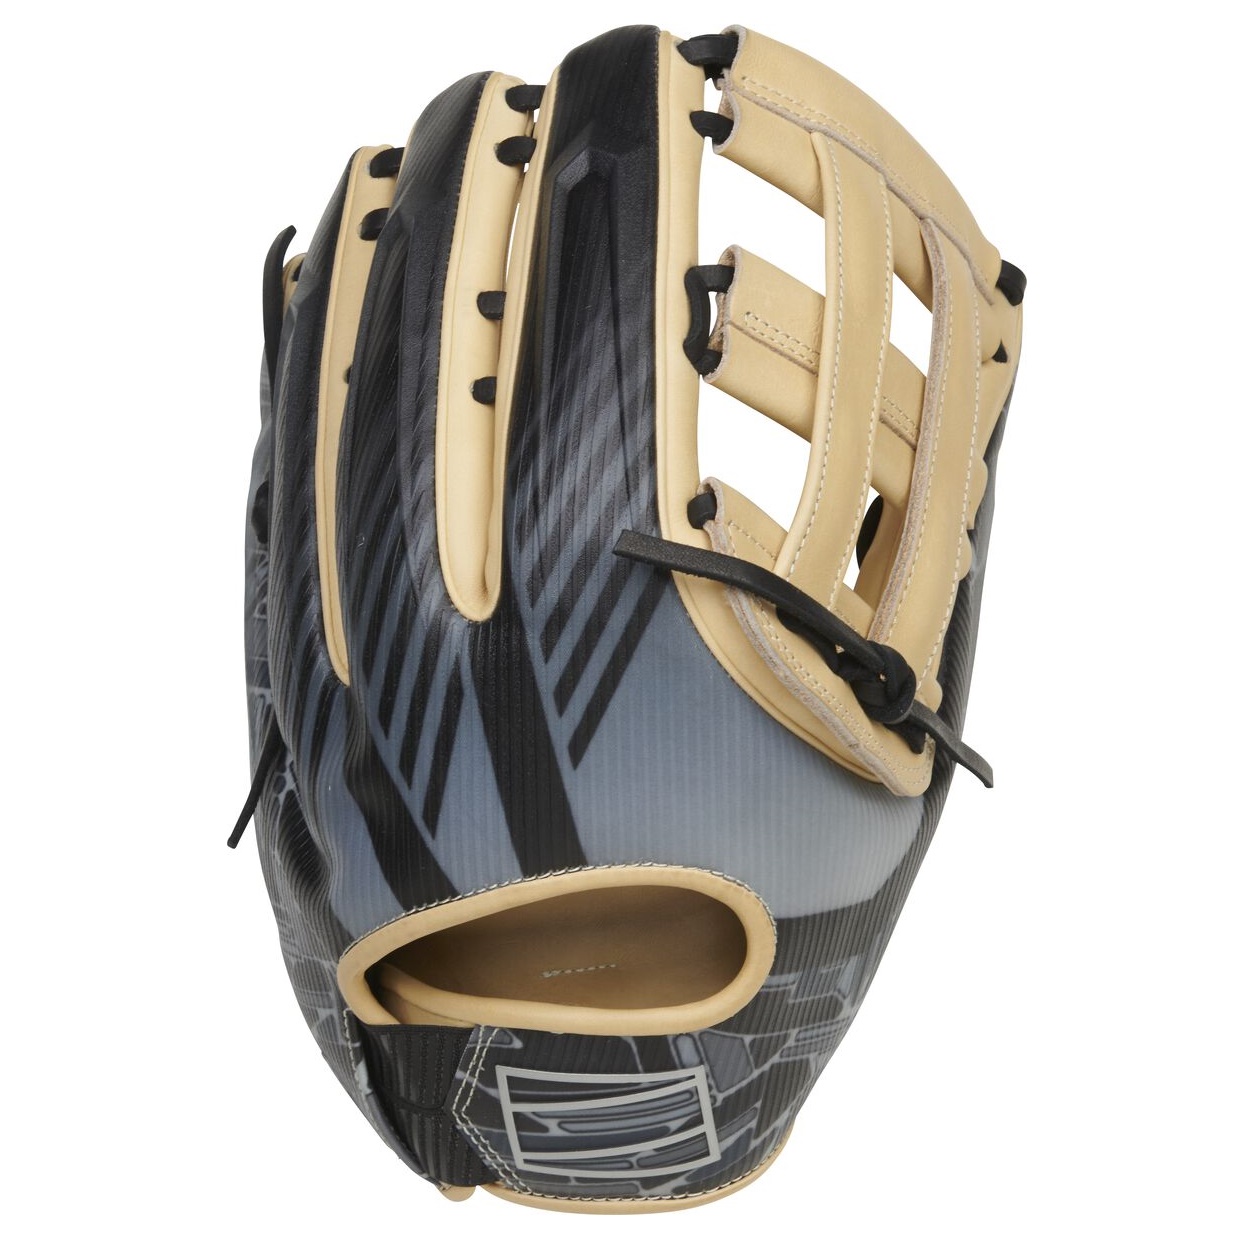 This Rawlings REV1X 12.75 inch baseball glove is a top-of-the-line piece of equipment for players of top levels. With its advanced technology and premium materials, this glove is designed to elevate players' performances on the field. One of the most notable features of the REV1X is its adaptive fit hand opening. This innovative design allows players to get a custom fit on their wrist every time they put the glove on, ensuring maximum comfort and a secure grip on the ball. This feature is especially important for players who need to make quick, precise movements on the field, as a poorly fitting glove can impede their performance. The REV1X is designed to fit a standard adult hand, making it suitable for both pro and college players, as well as high school and 14U players. The glove is lined with Heart of the Hide leather, a premium material that is known for its durability and excellent feel. This lining, combined with the glove's padding, provides players with a comfortable and secure grip on the ball. The REV1X's padding is one of its standout features. Carbon's Digital Light Synthesis™ (DLS™) method is used to create a 3D-printed lattice structure in the thumb and pinky, providing variable stiffness that lasts longer than traditional wool padding. This advanced fabrication process not only improves the glove's durability but also drastically reduces its weight. As a result, players will enjoy unrivaled feel and protection without sacrificing durability. The REV1X's design is also noteworthy. The glove features an engineered multi-layer molded 3D back with a stylish pattern, 303, that is sure to turn heads on the field. The Pro H web provides a consistent feel, making sure you're snagging everything hit your way. The ultra-premium 'HOH' leather in all the right places, these gloves boast the same professional quality break-in & performance you expect from Rawlings. The Rawlings REV1X baseball glove is an advanced piece of equipment that offers players top-quality materials, cutting-edge technology, and a comfortable, custom fit. It is suitable for players of top levels and is sure to take their performance to the next level. The REV1X is a defensive masterpiece that will take your game to the next level.